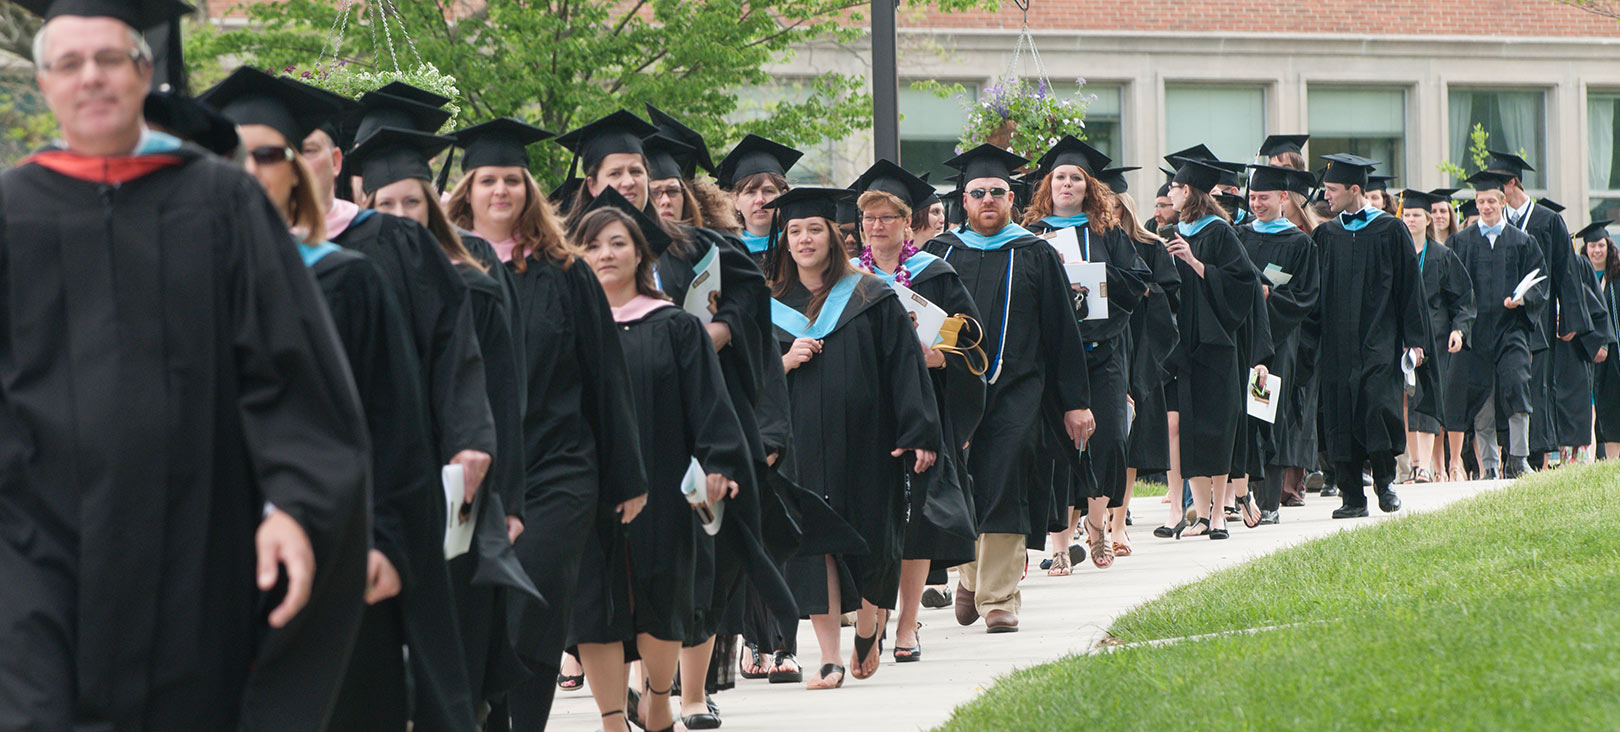 Financial Aid for Graduate Programs Graduating seniors walking with their gowns and caps on.jpg